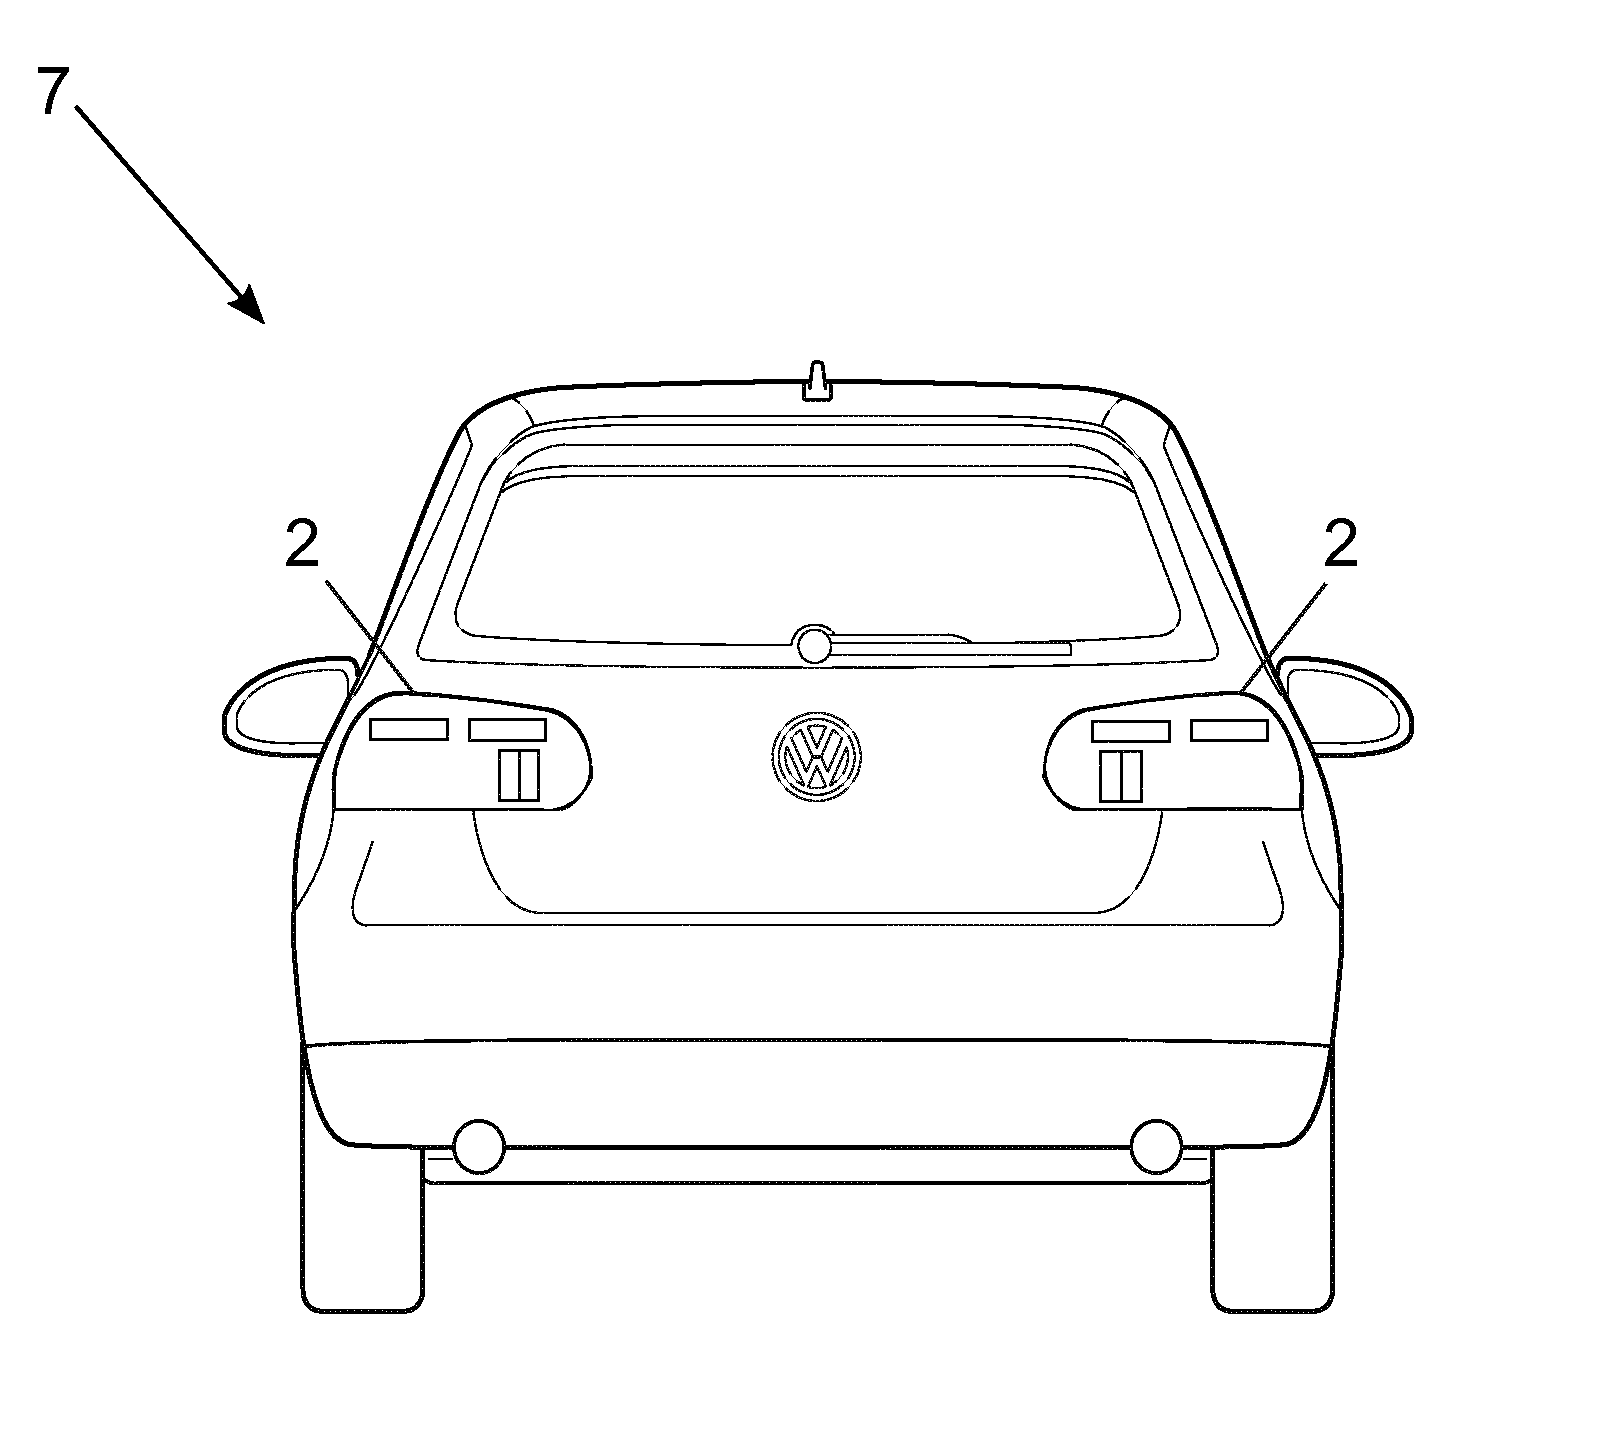 Method and device for controlling the light emission of a rear light of a vehicle